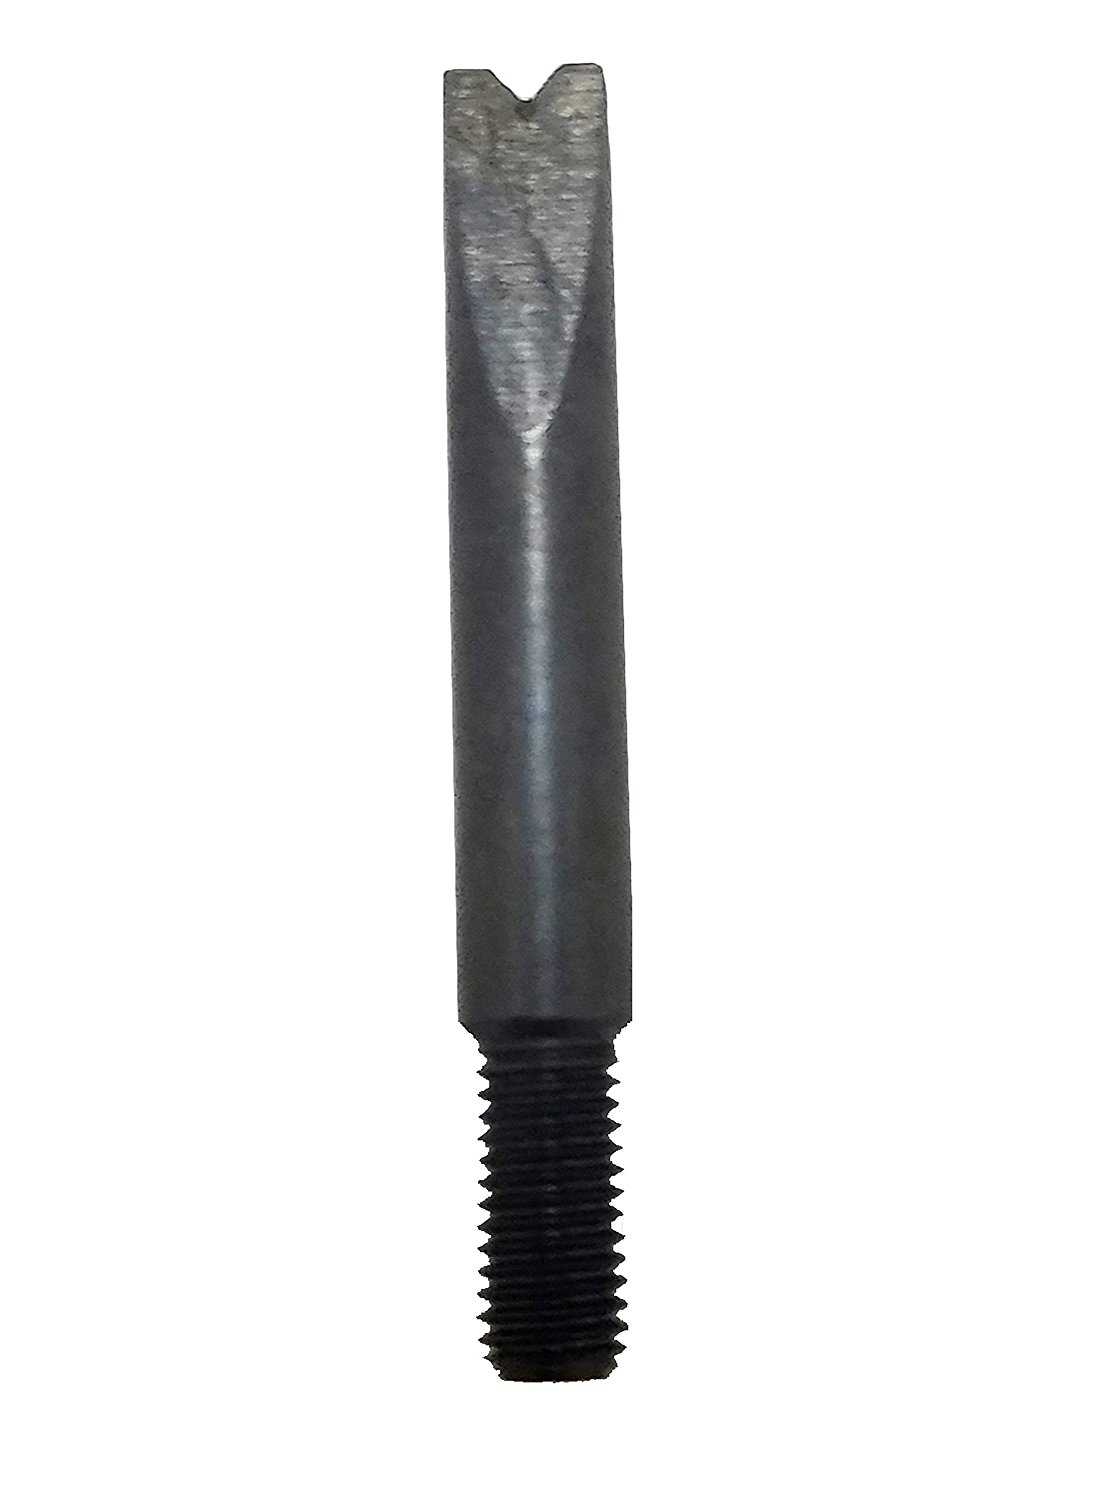 Spring Bar Tool Flat Tip (replacement), Fits No. 3153 Swiss made Bergeon Spring Bar Tool By Bergeon